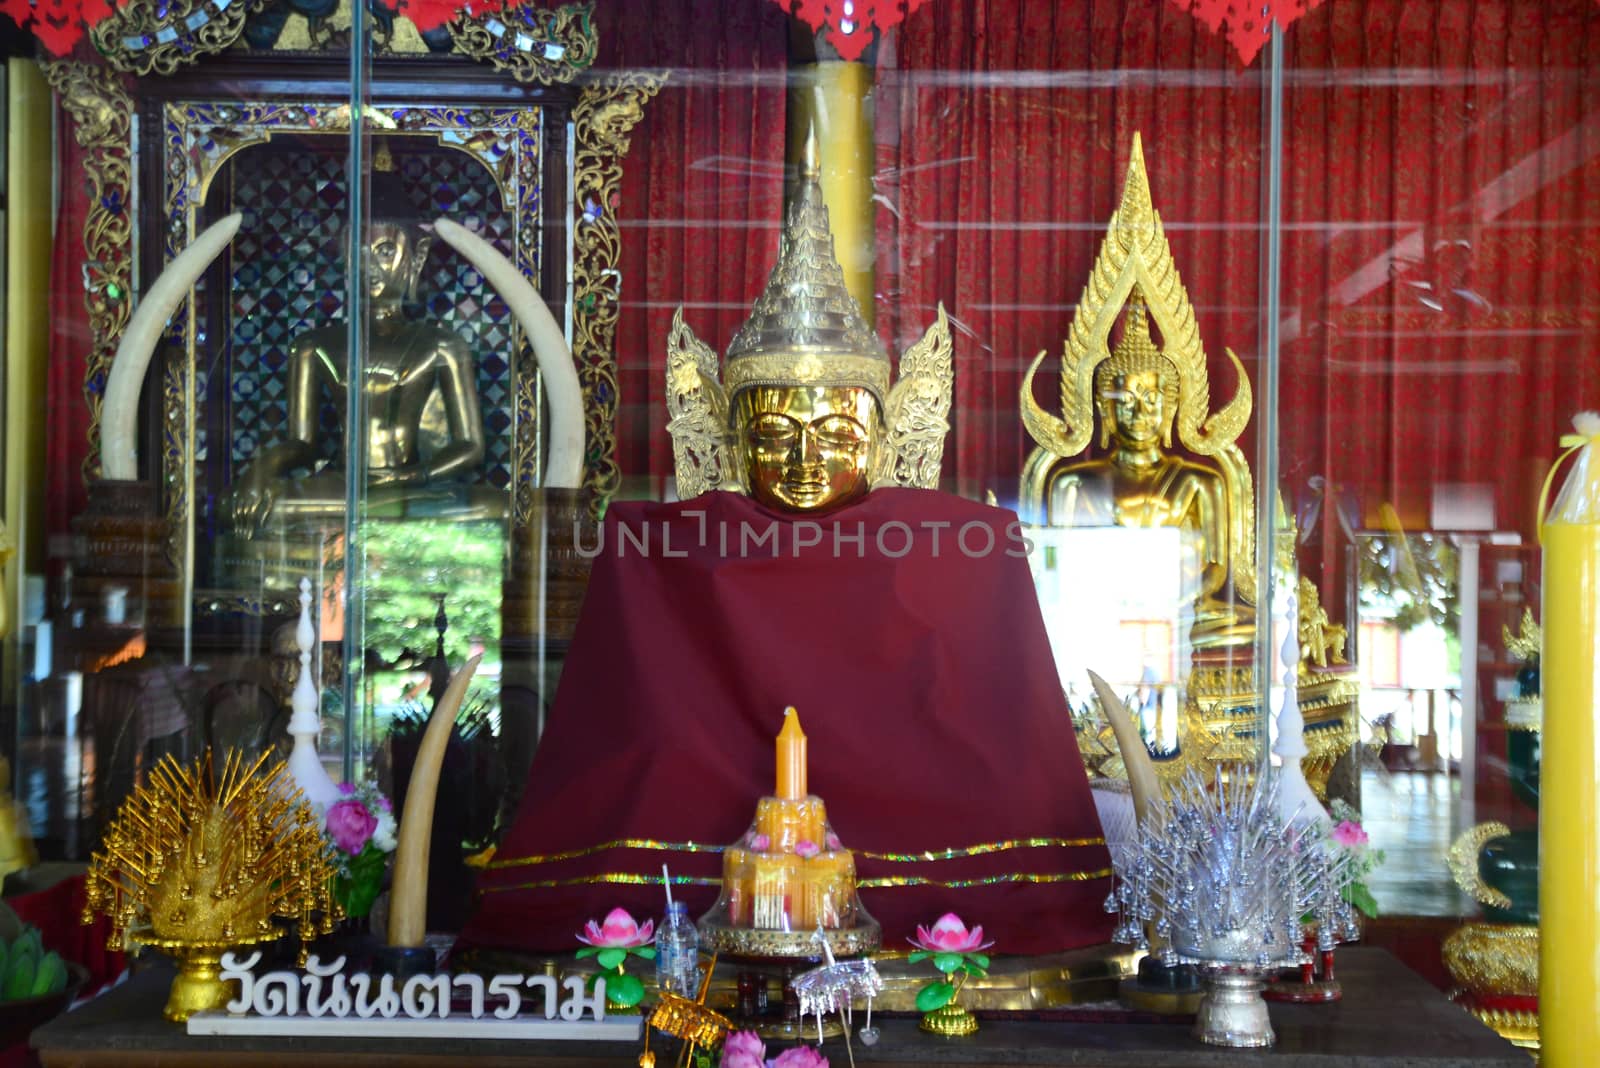 Phayao, Thailand  – 21 December, 2019 : Wat Nantaram, the principle Buddha image crafted from teak wood in the Viharn (sermon hall) of teak wood, exquisitely crafted in traditional Tai Yai style 